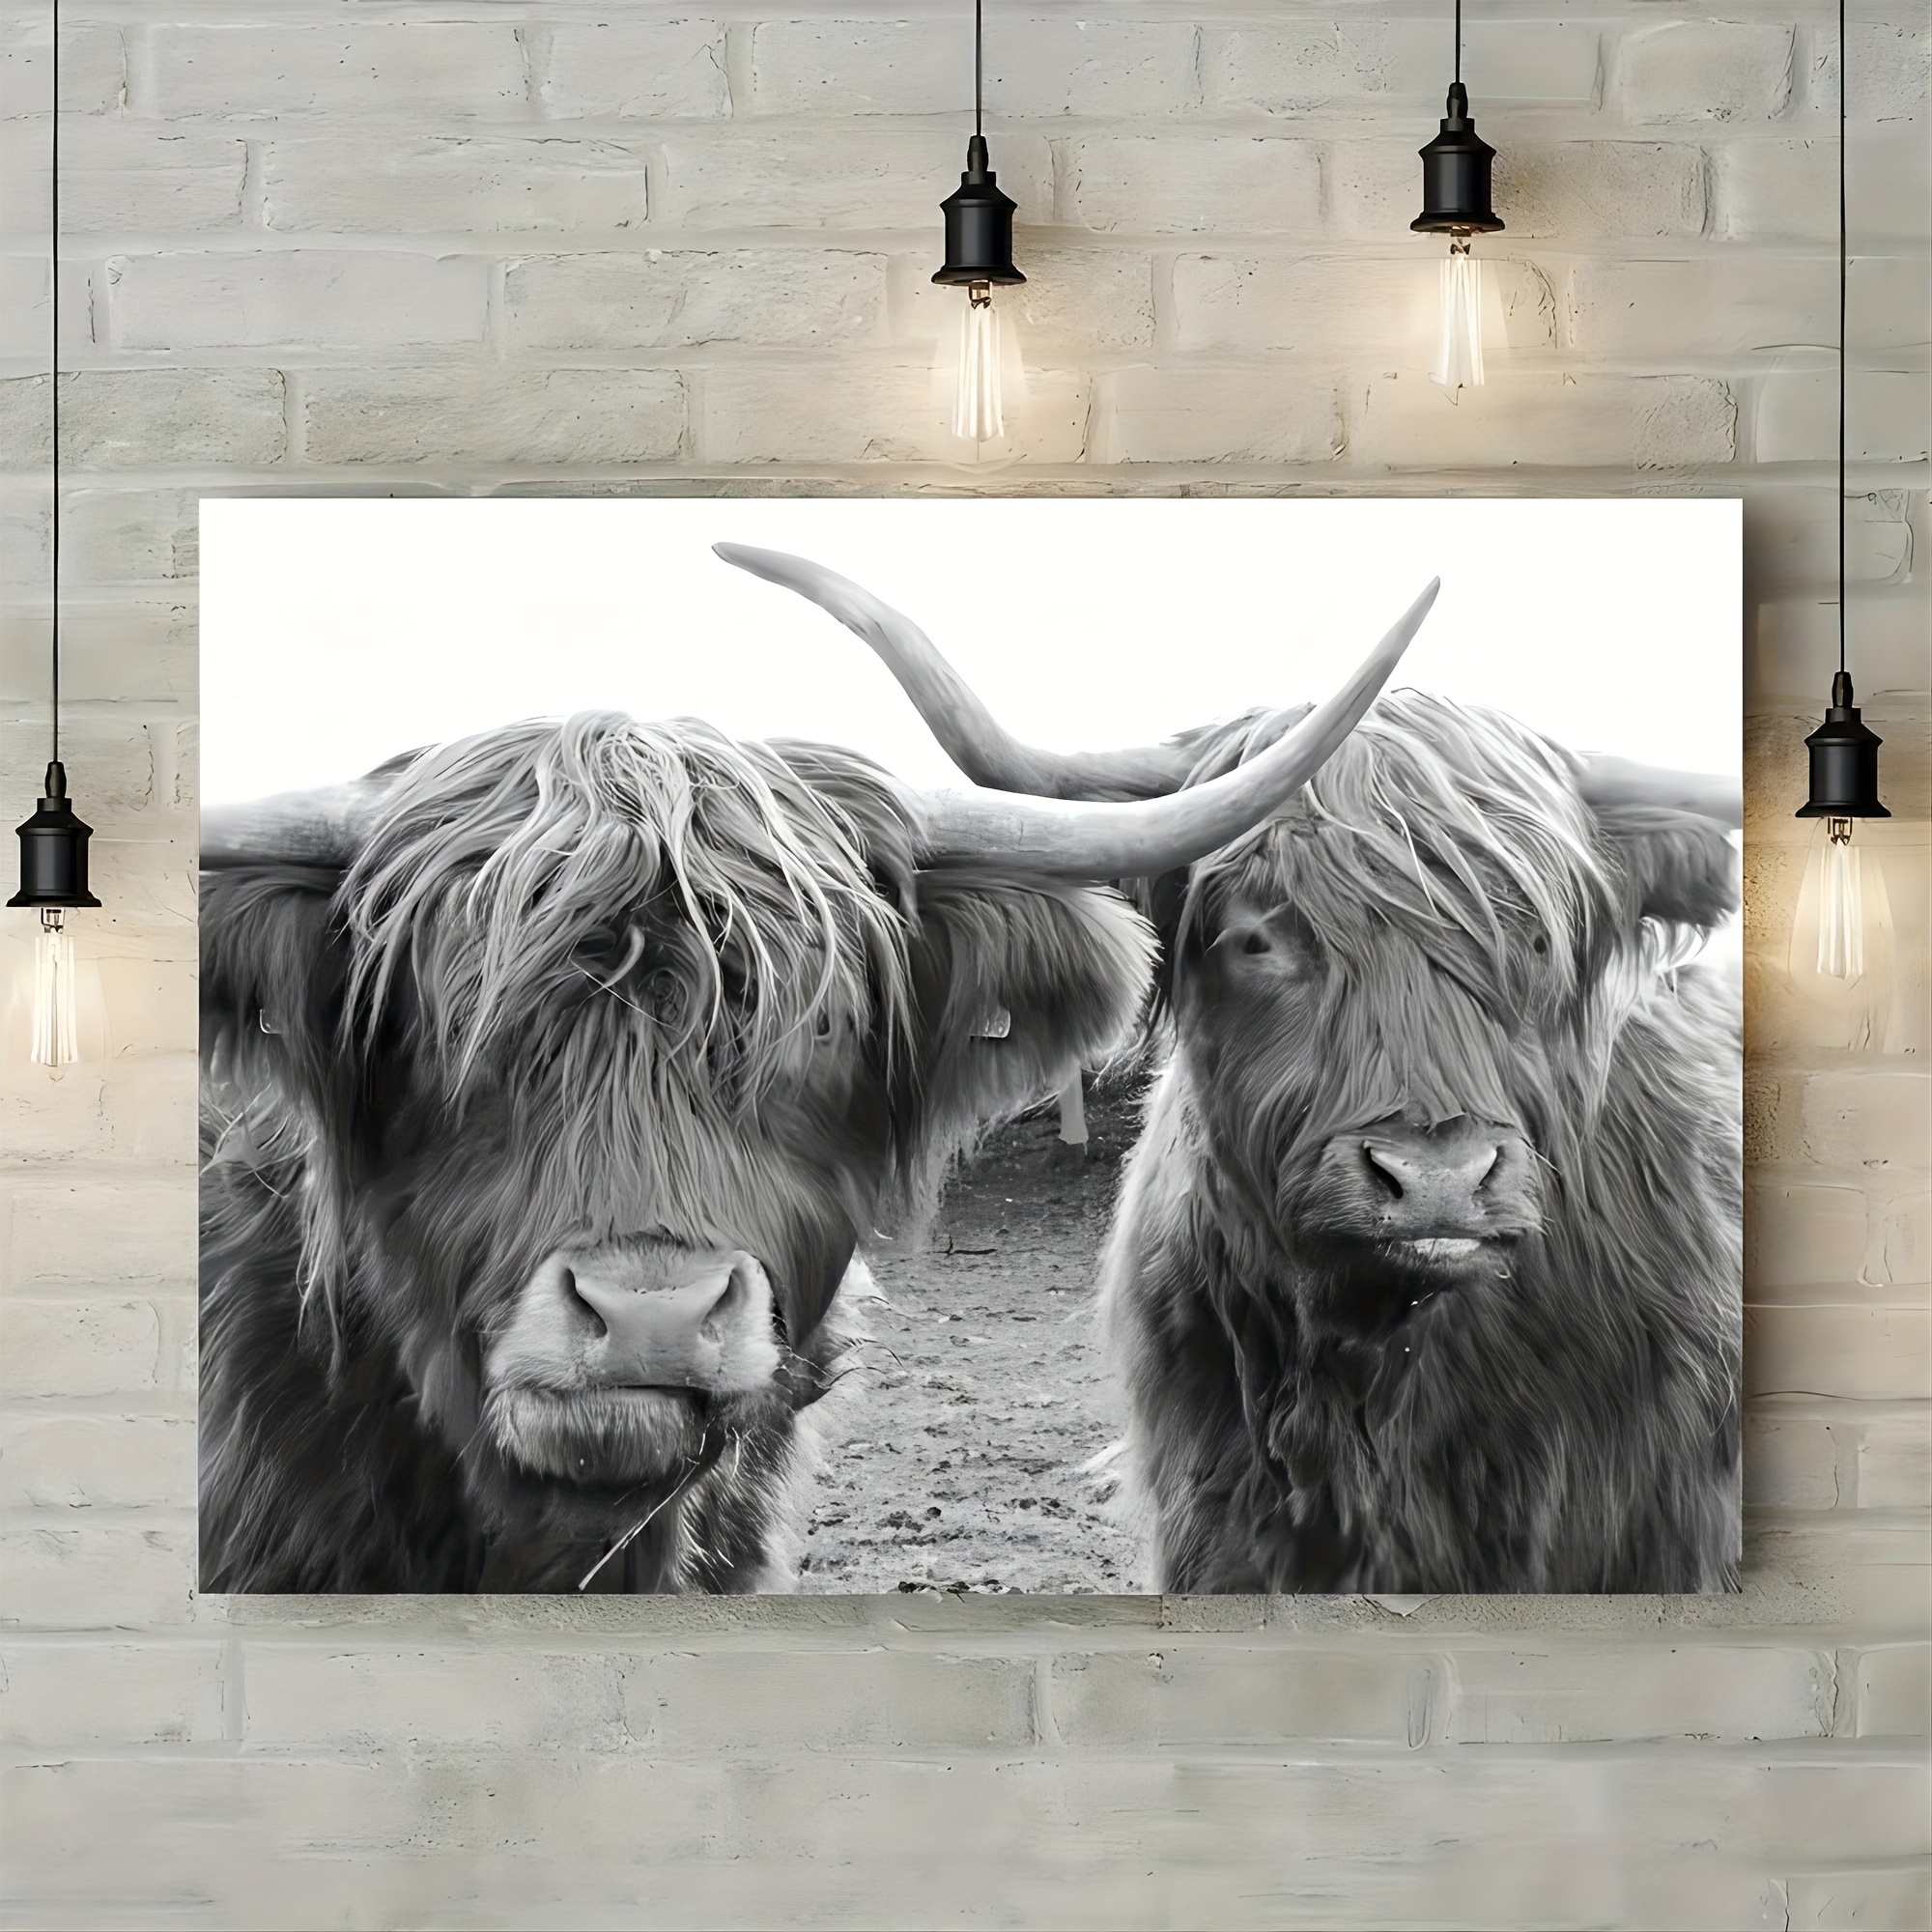 

1pc Canvas Poster, Black And White Highland Cow Print, Farm Animal Canvas Wall Art Deor, Cow Printed Poster, Gift For Friend, Farmhouse Decor, Room Decor, Home Decor, No Frame